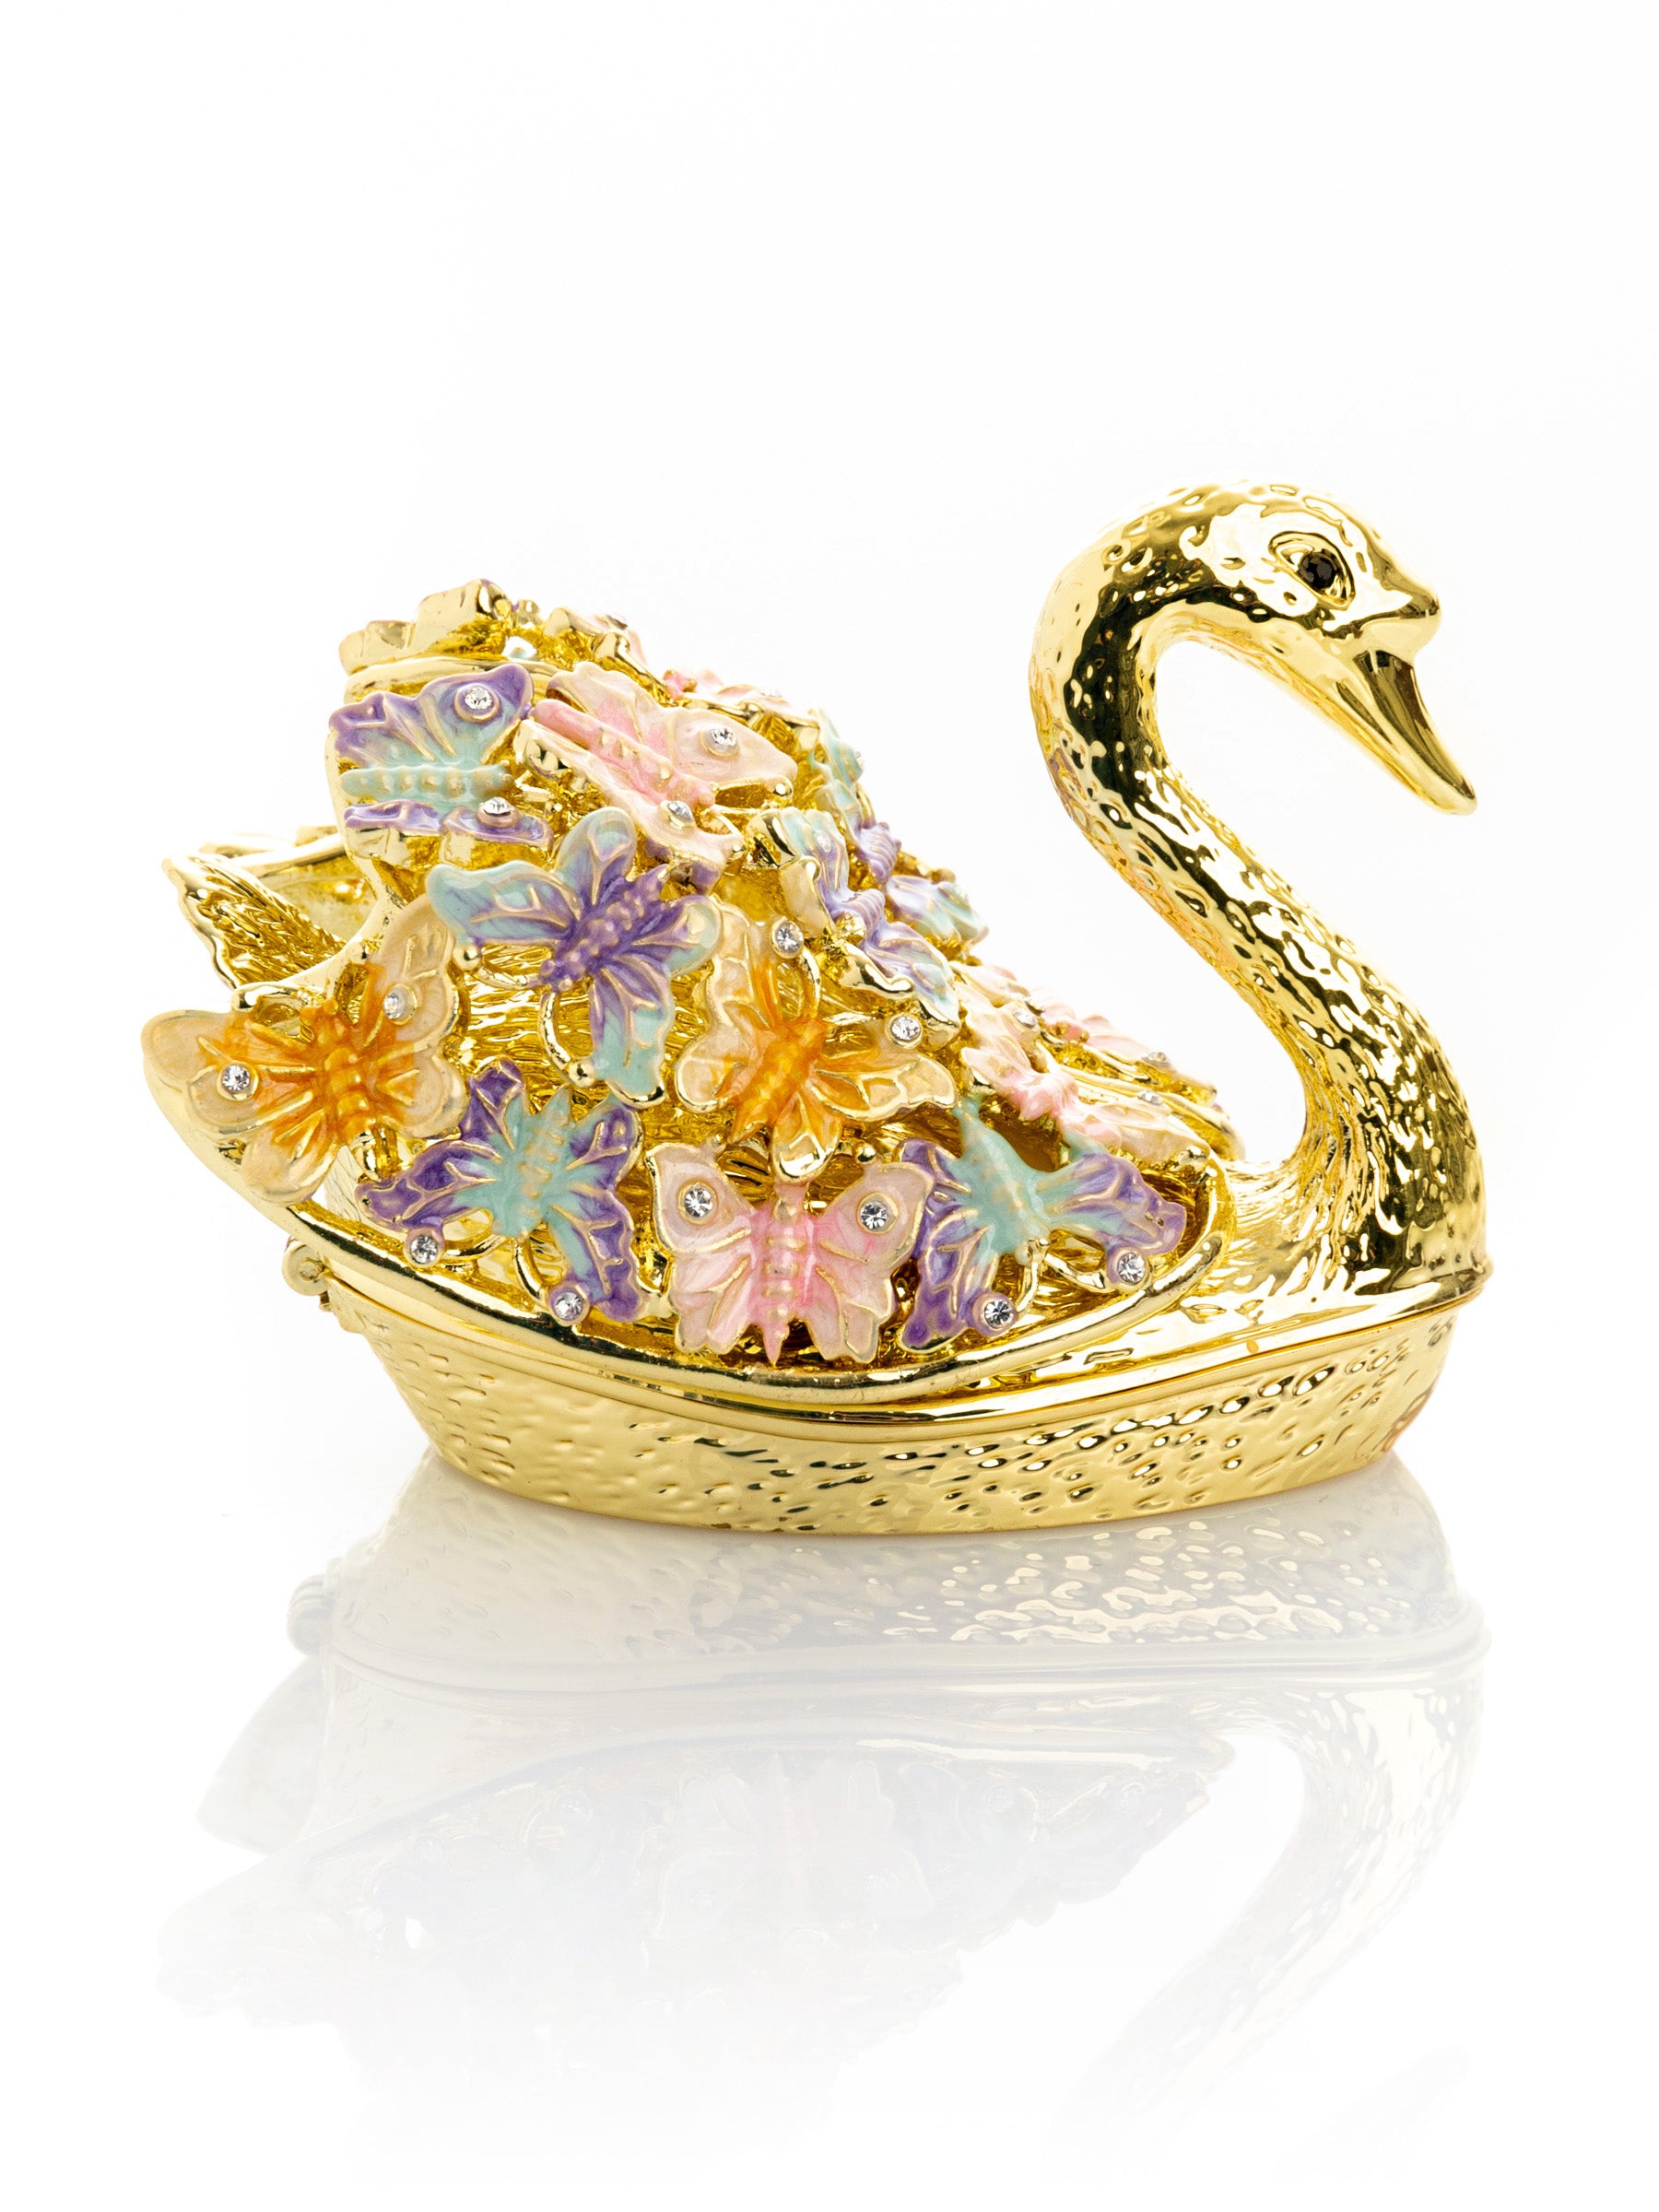 Golden Swan Decorated with Butterflies